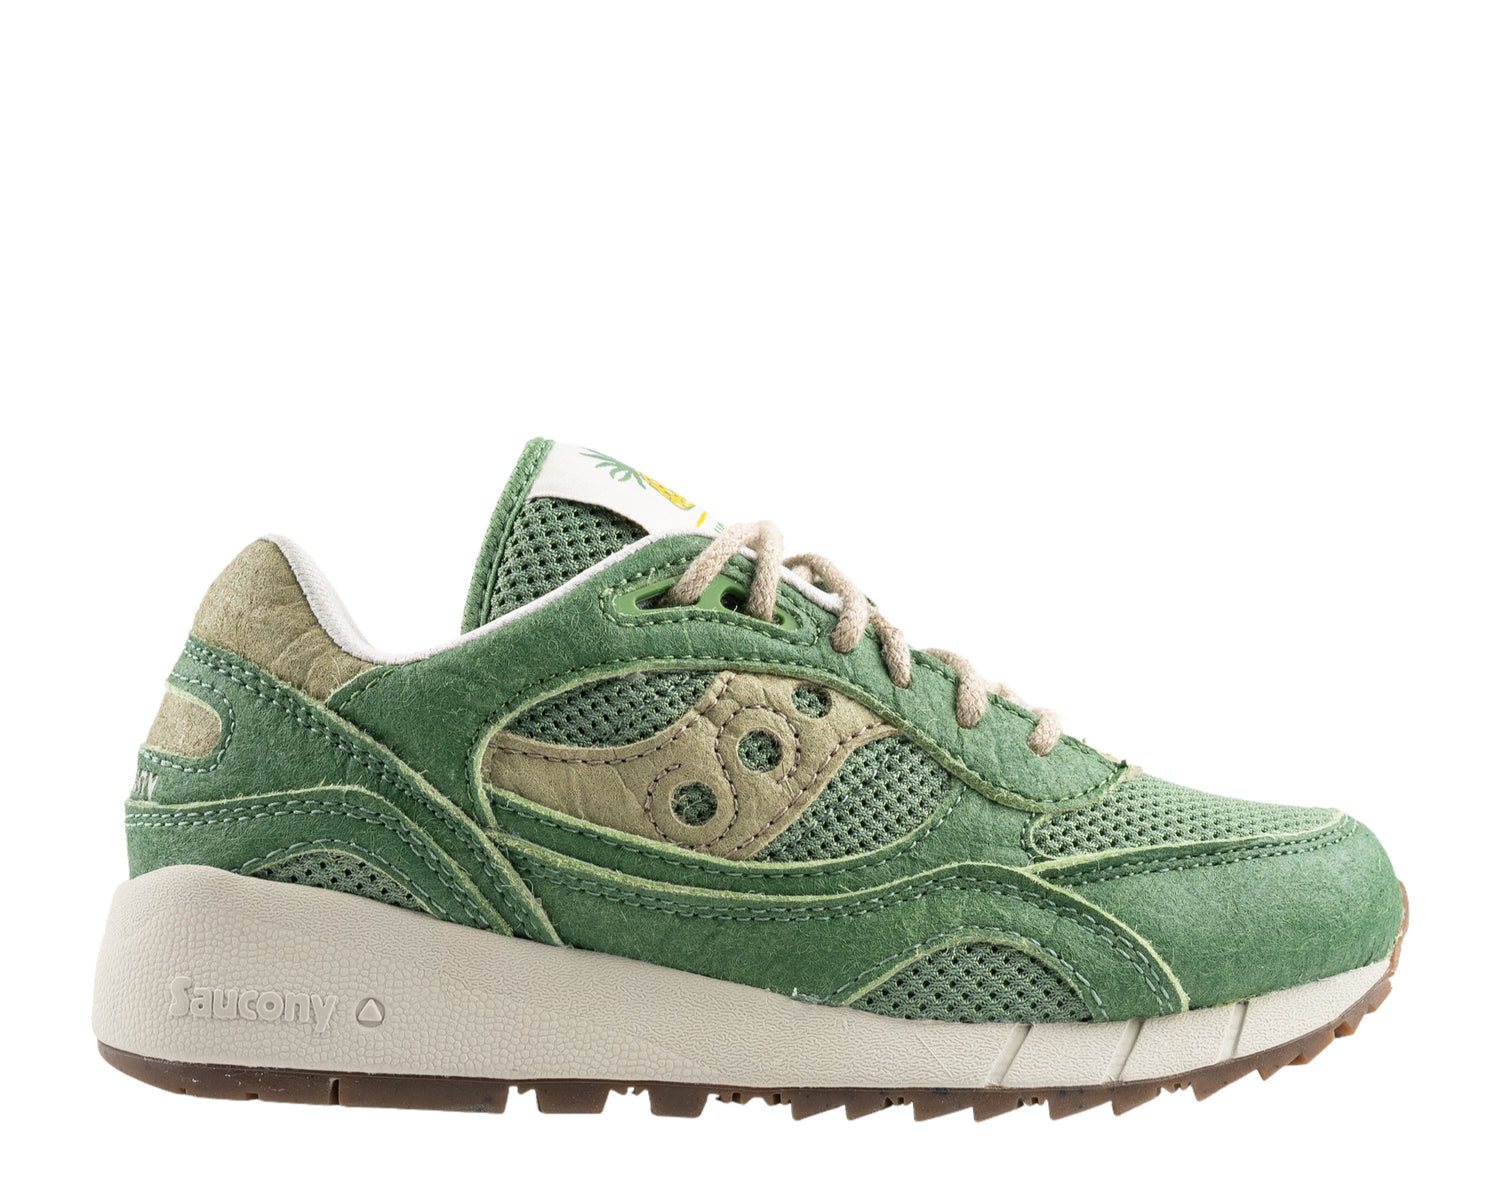 Saucony Originals Shadow 6000 - Earth Pack RFG - Running Shoes